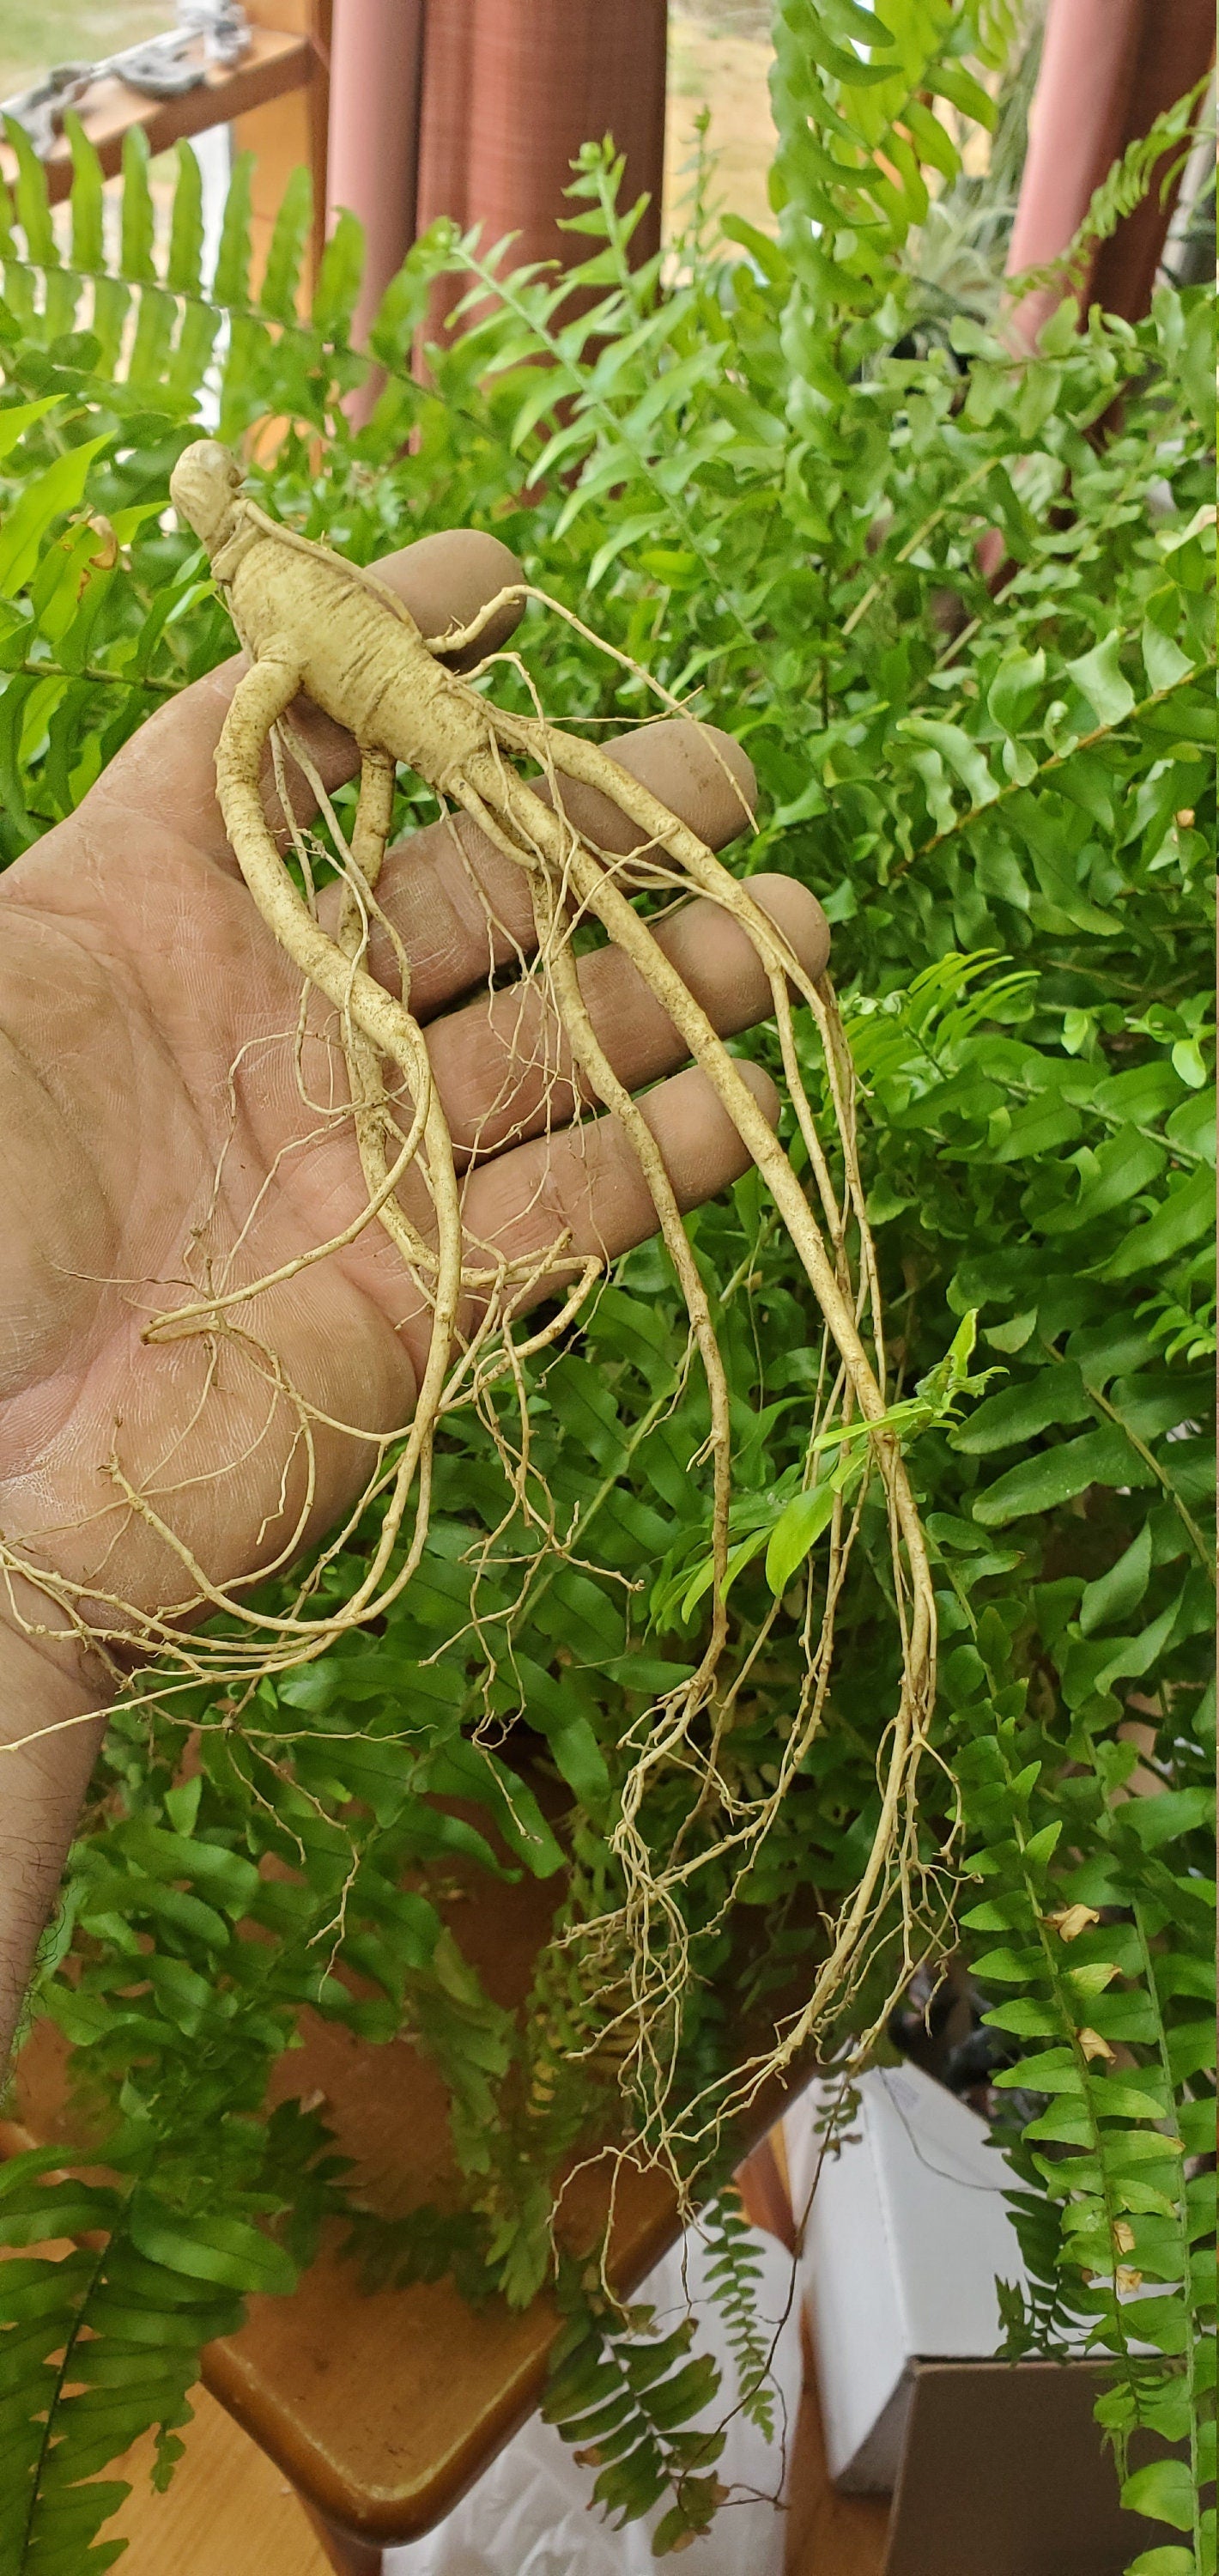 American Ginseng (Panax quinquefolia) - Dried Whole Root